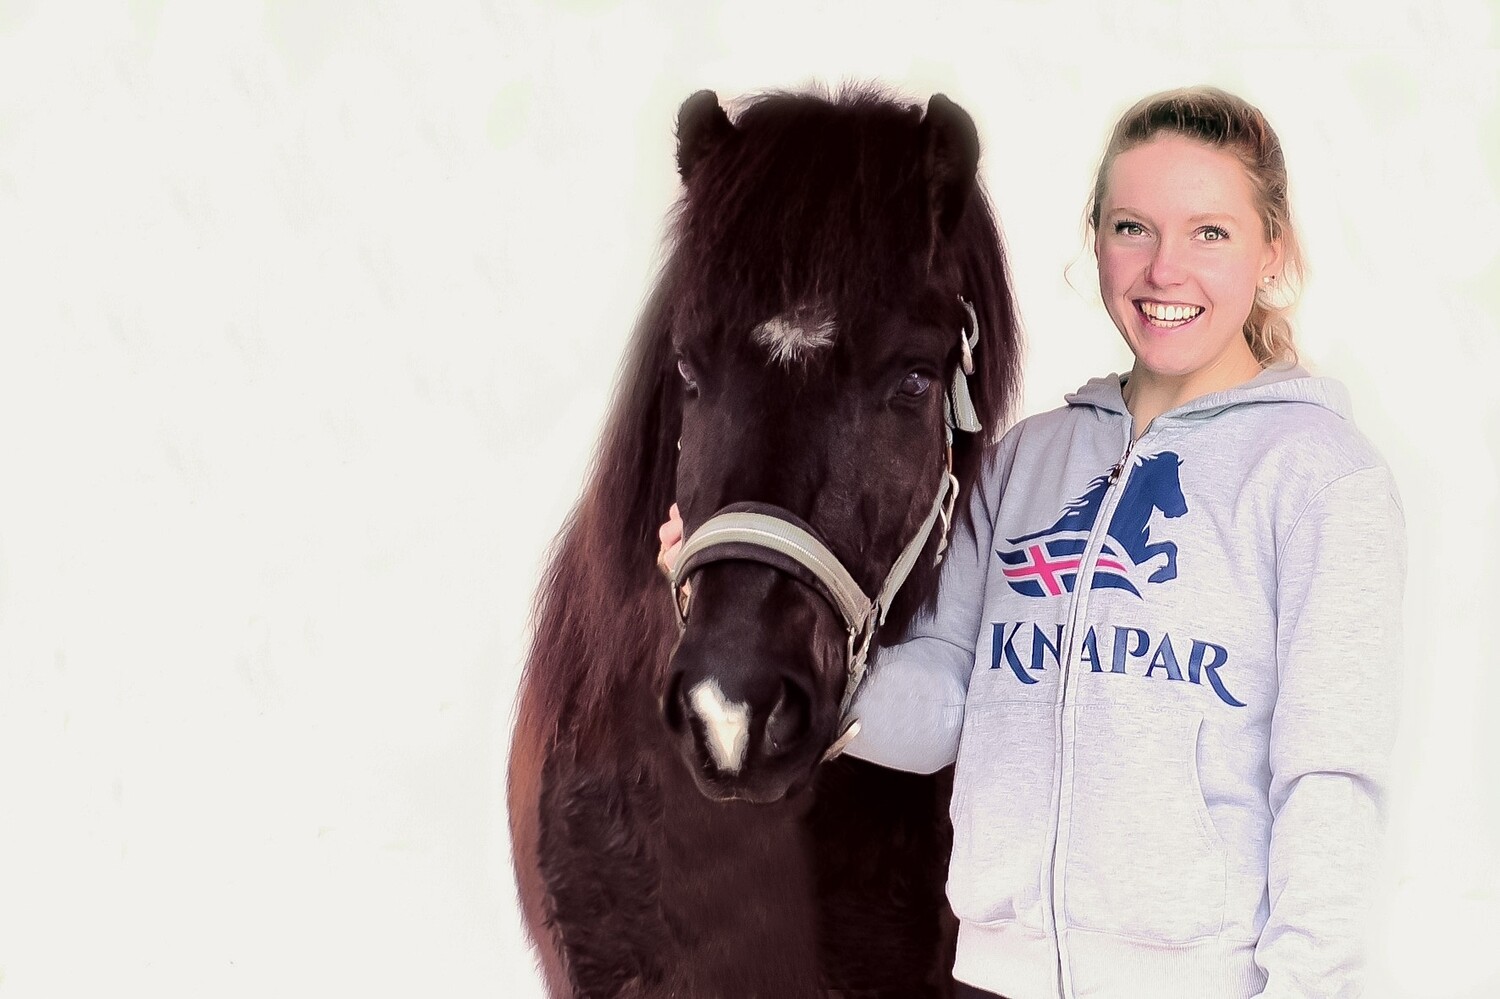 "HLÝTT" - cozy zipper hoodie for Icelandic horse fans and riders